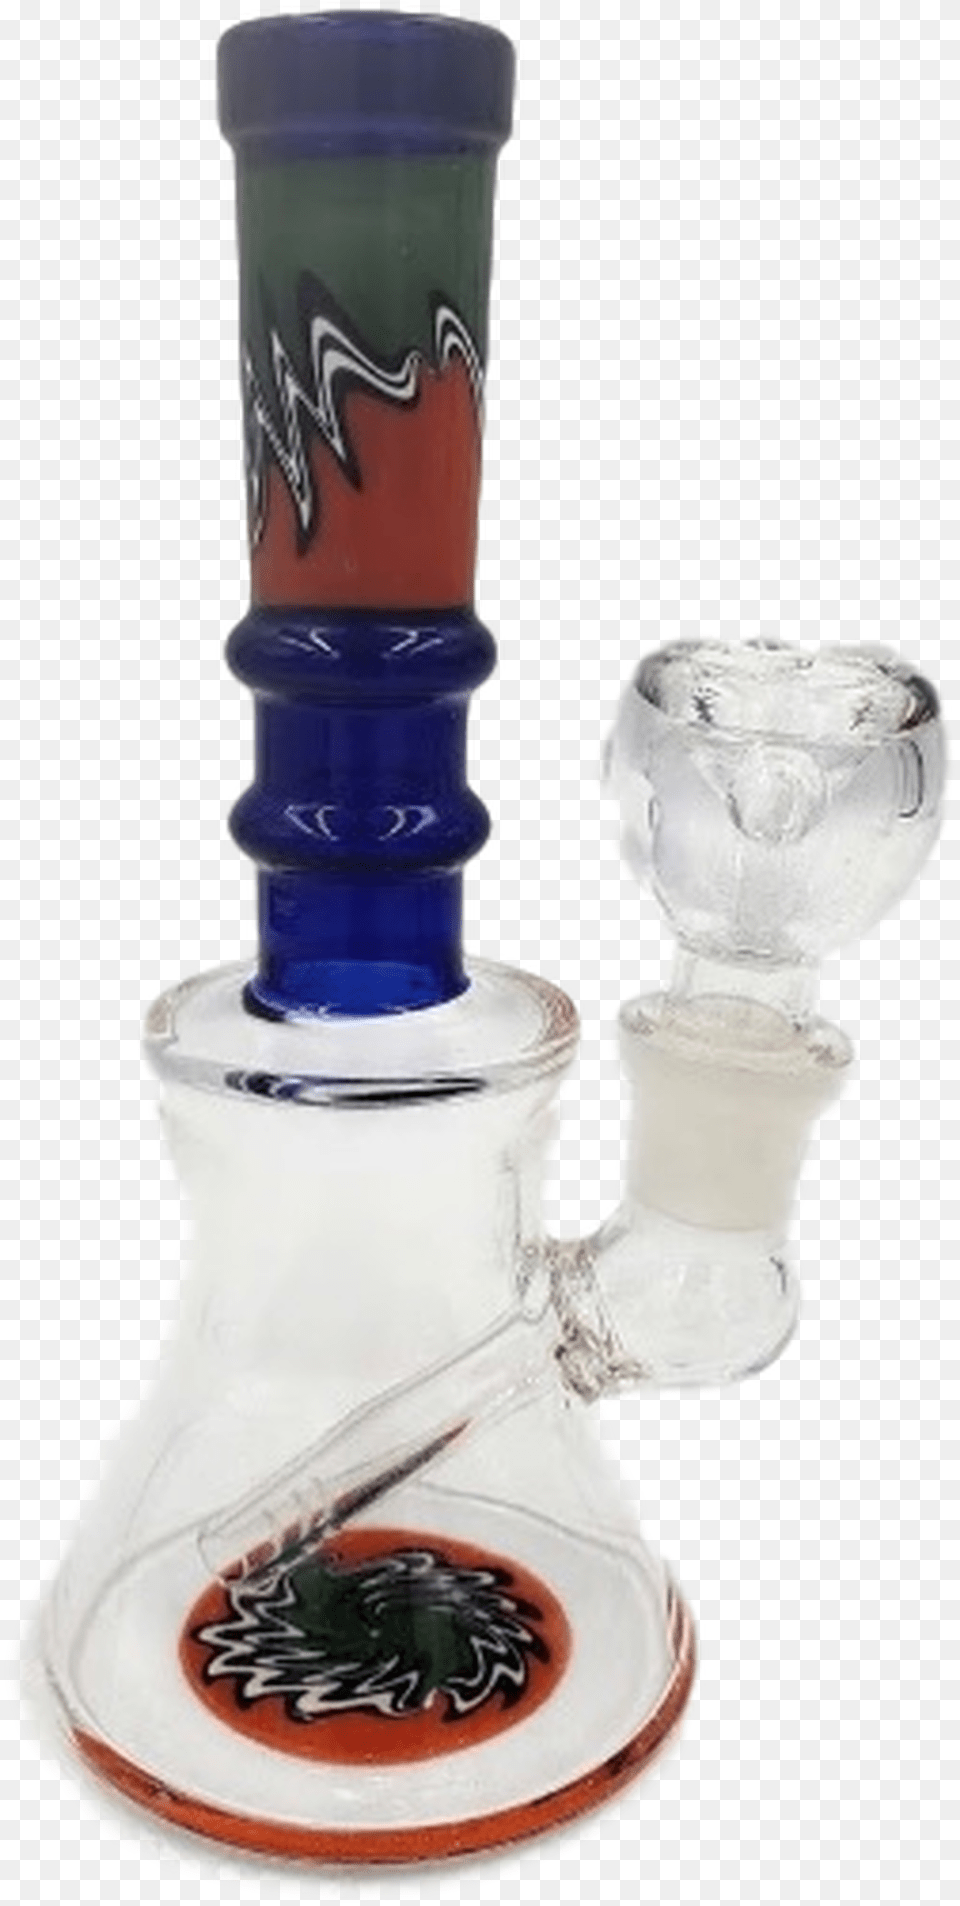 Decanter, Smoke Pipe, Glass, Bottle, Candle Png